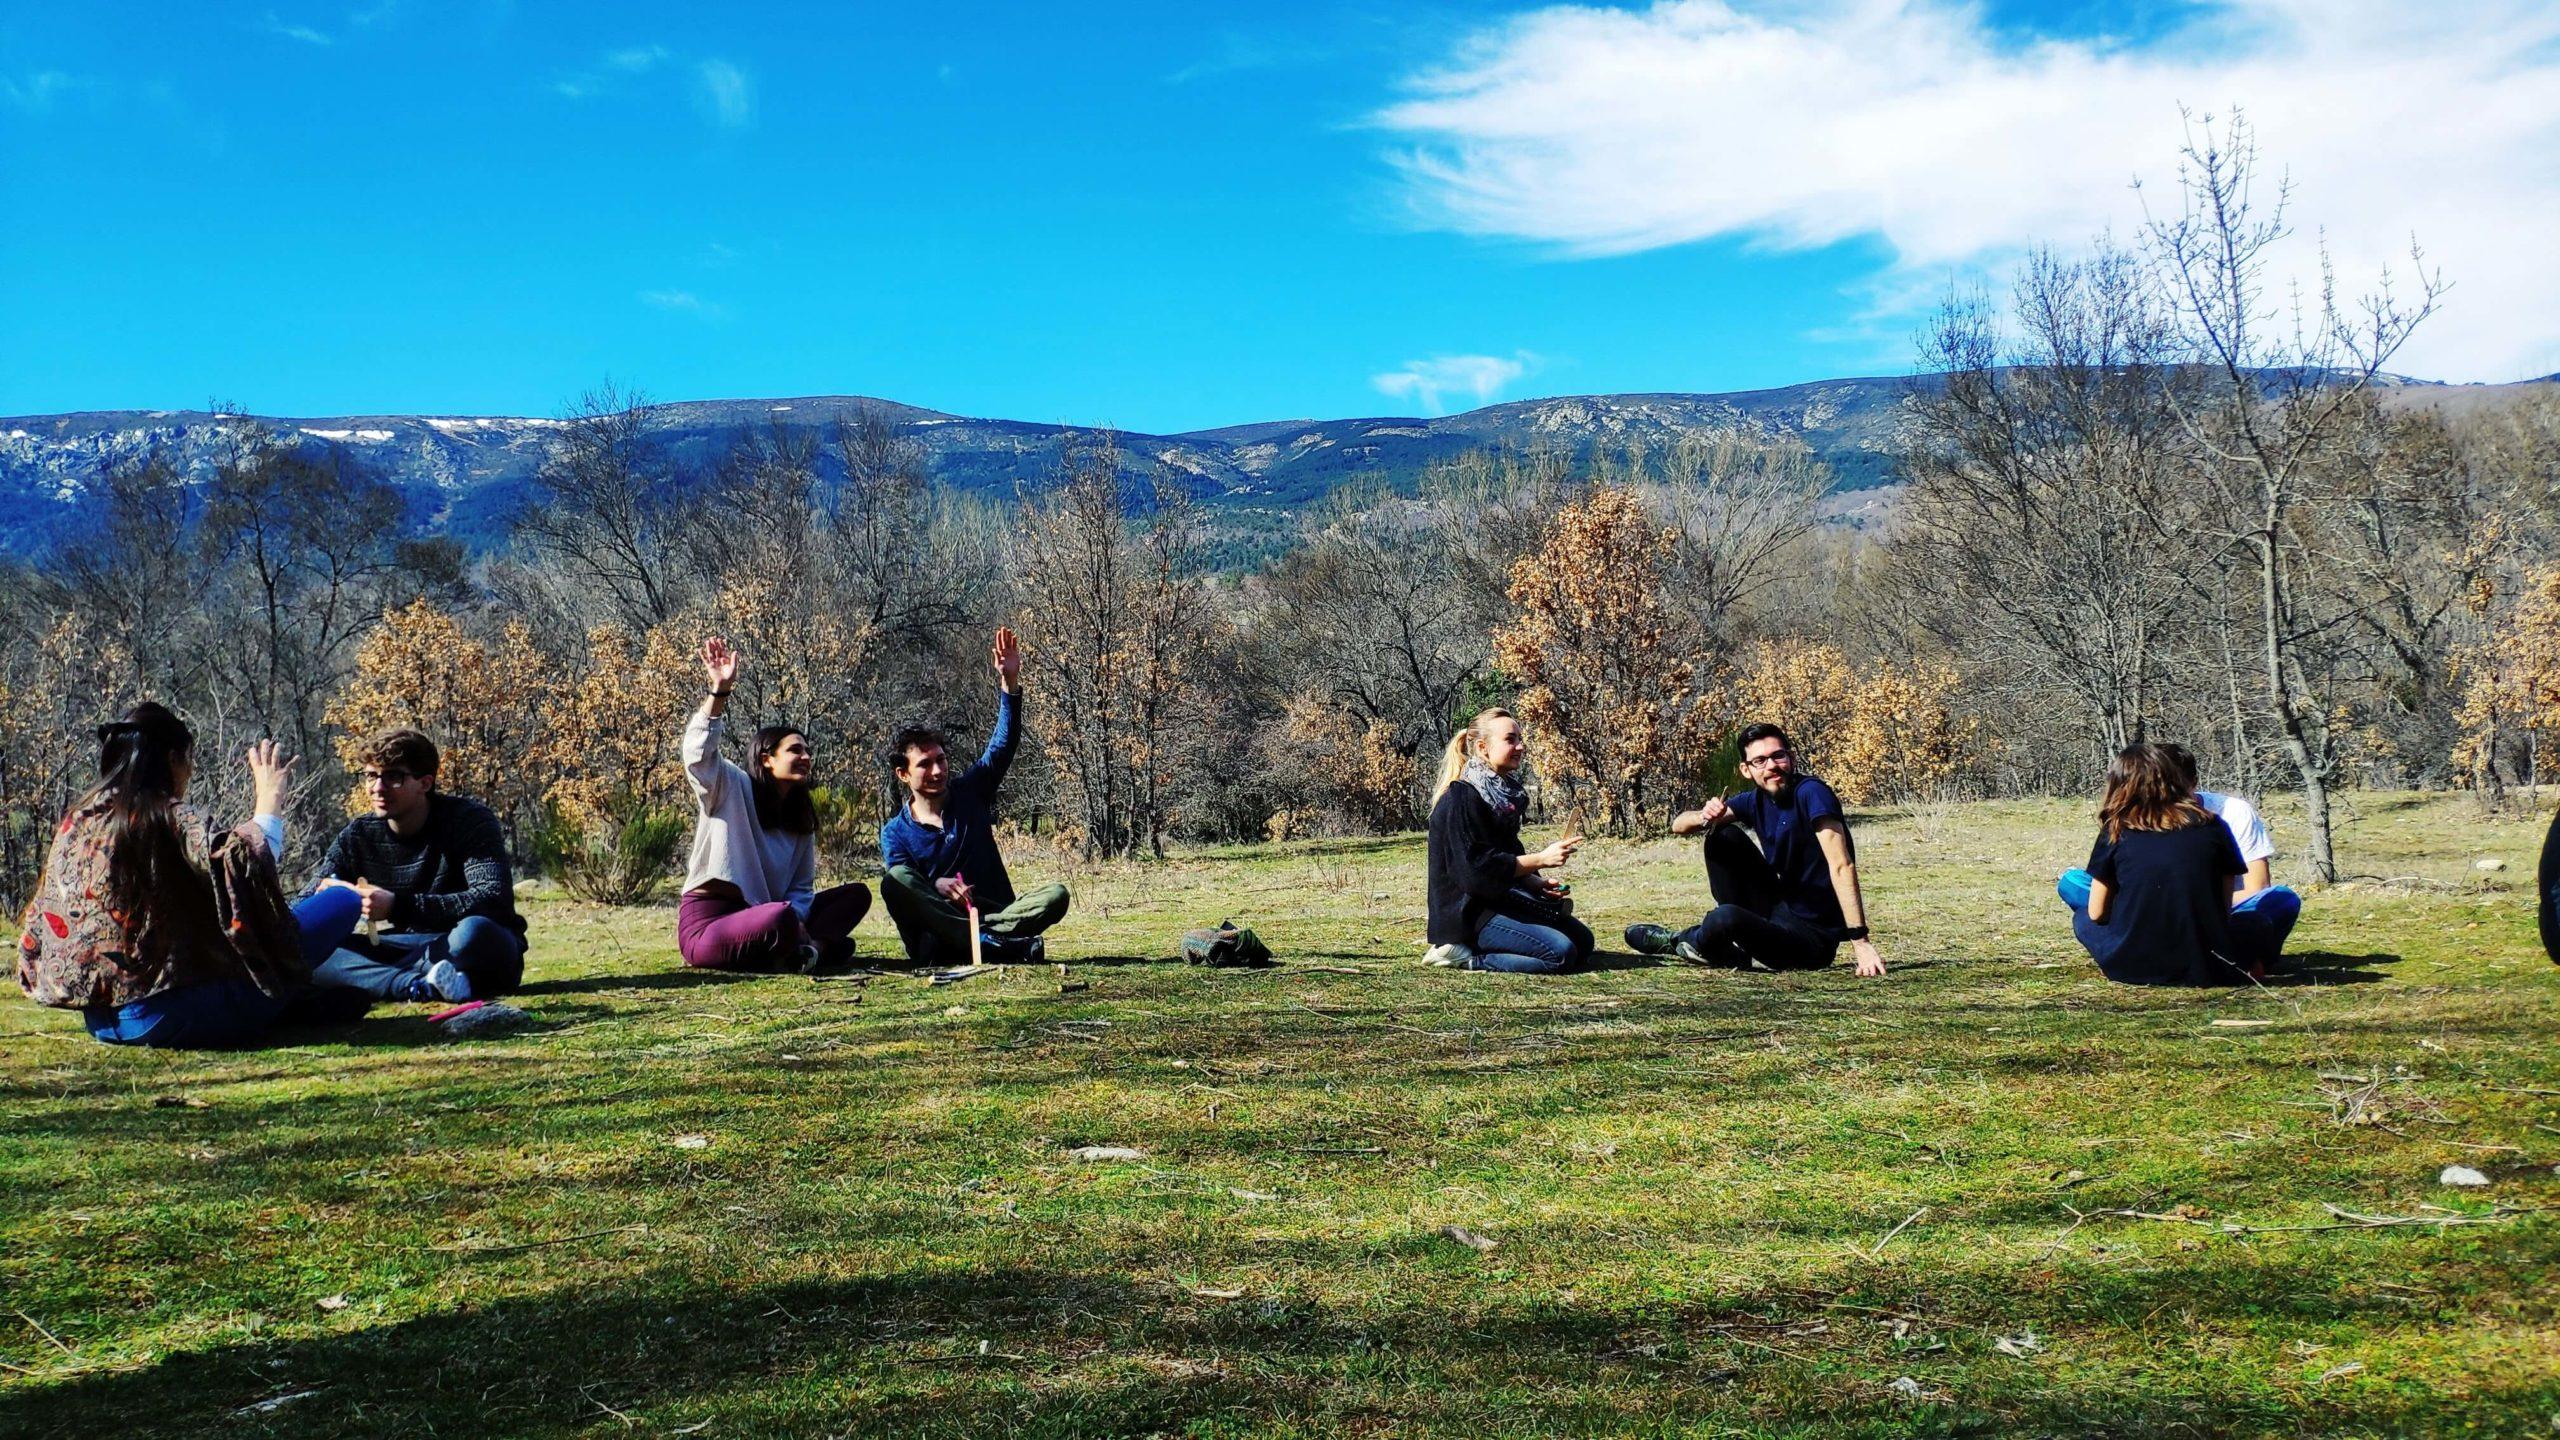 Group sitting in grassy field with mountains in background